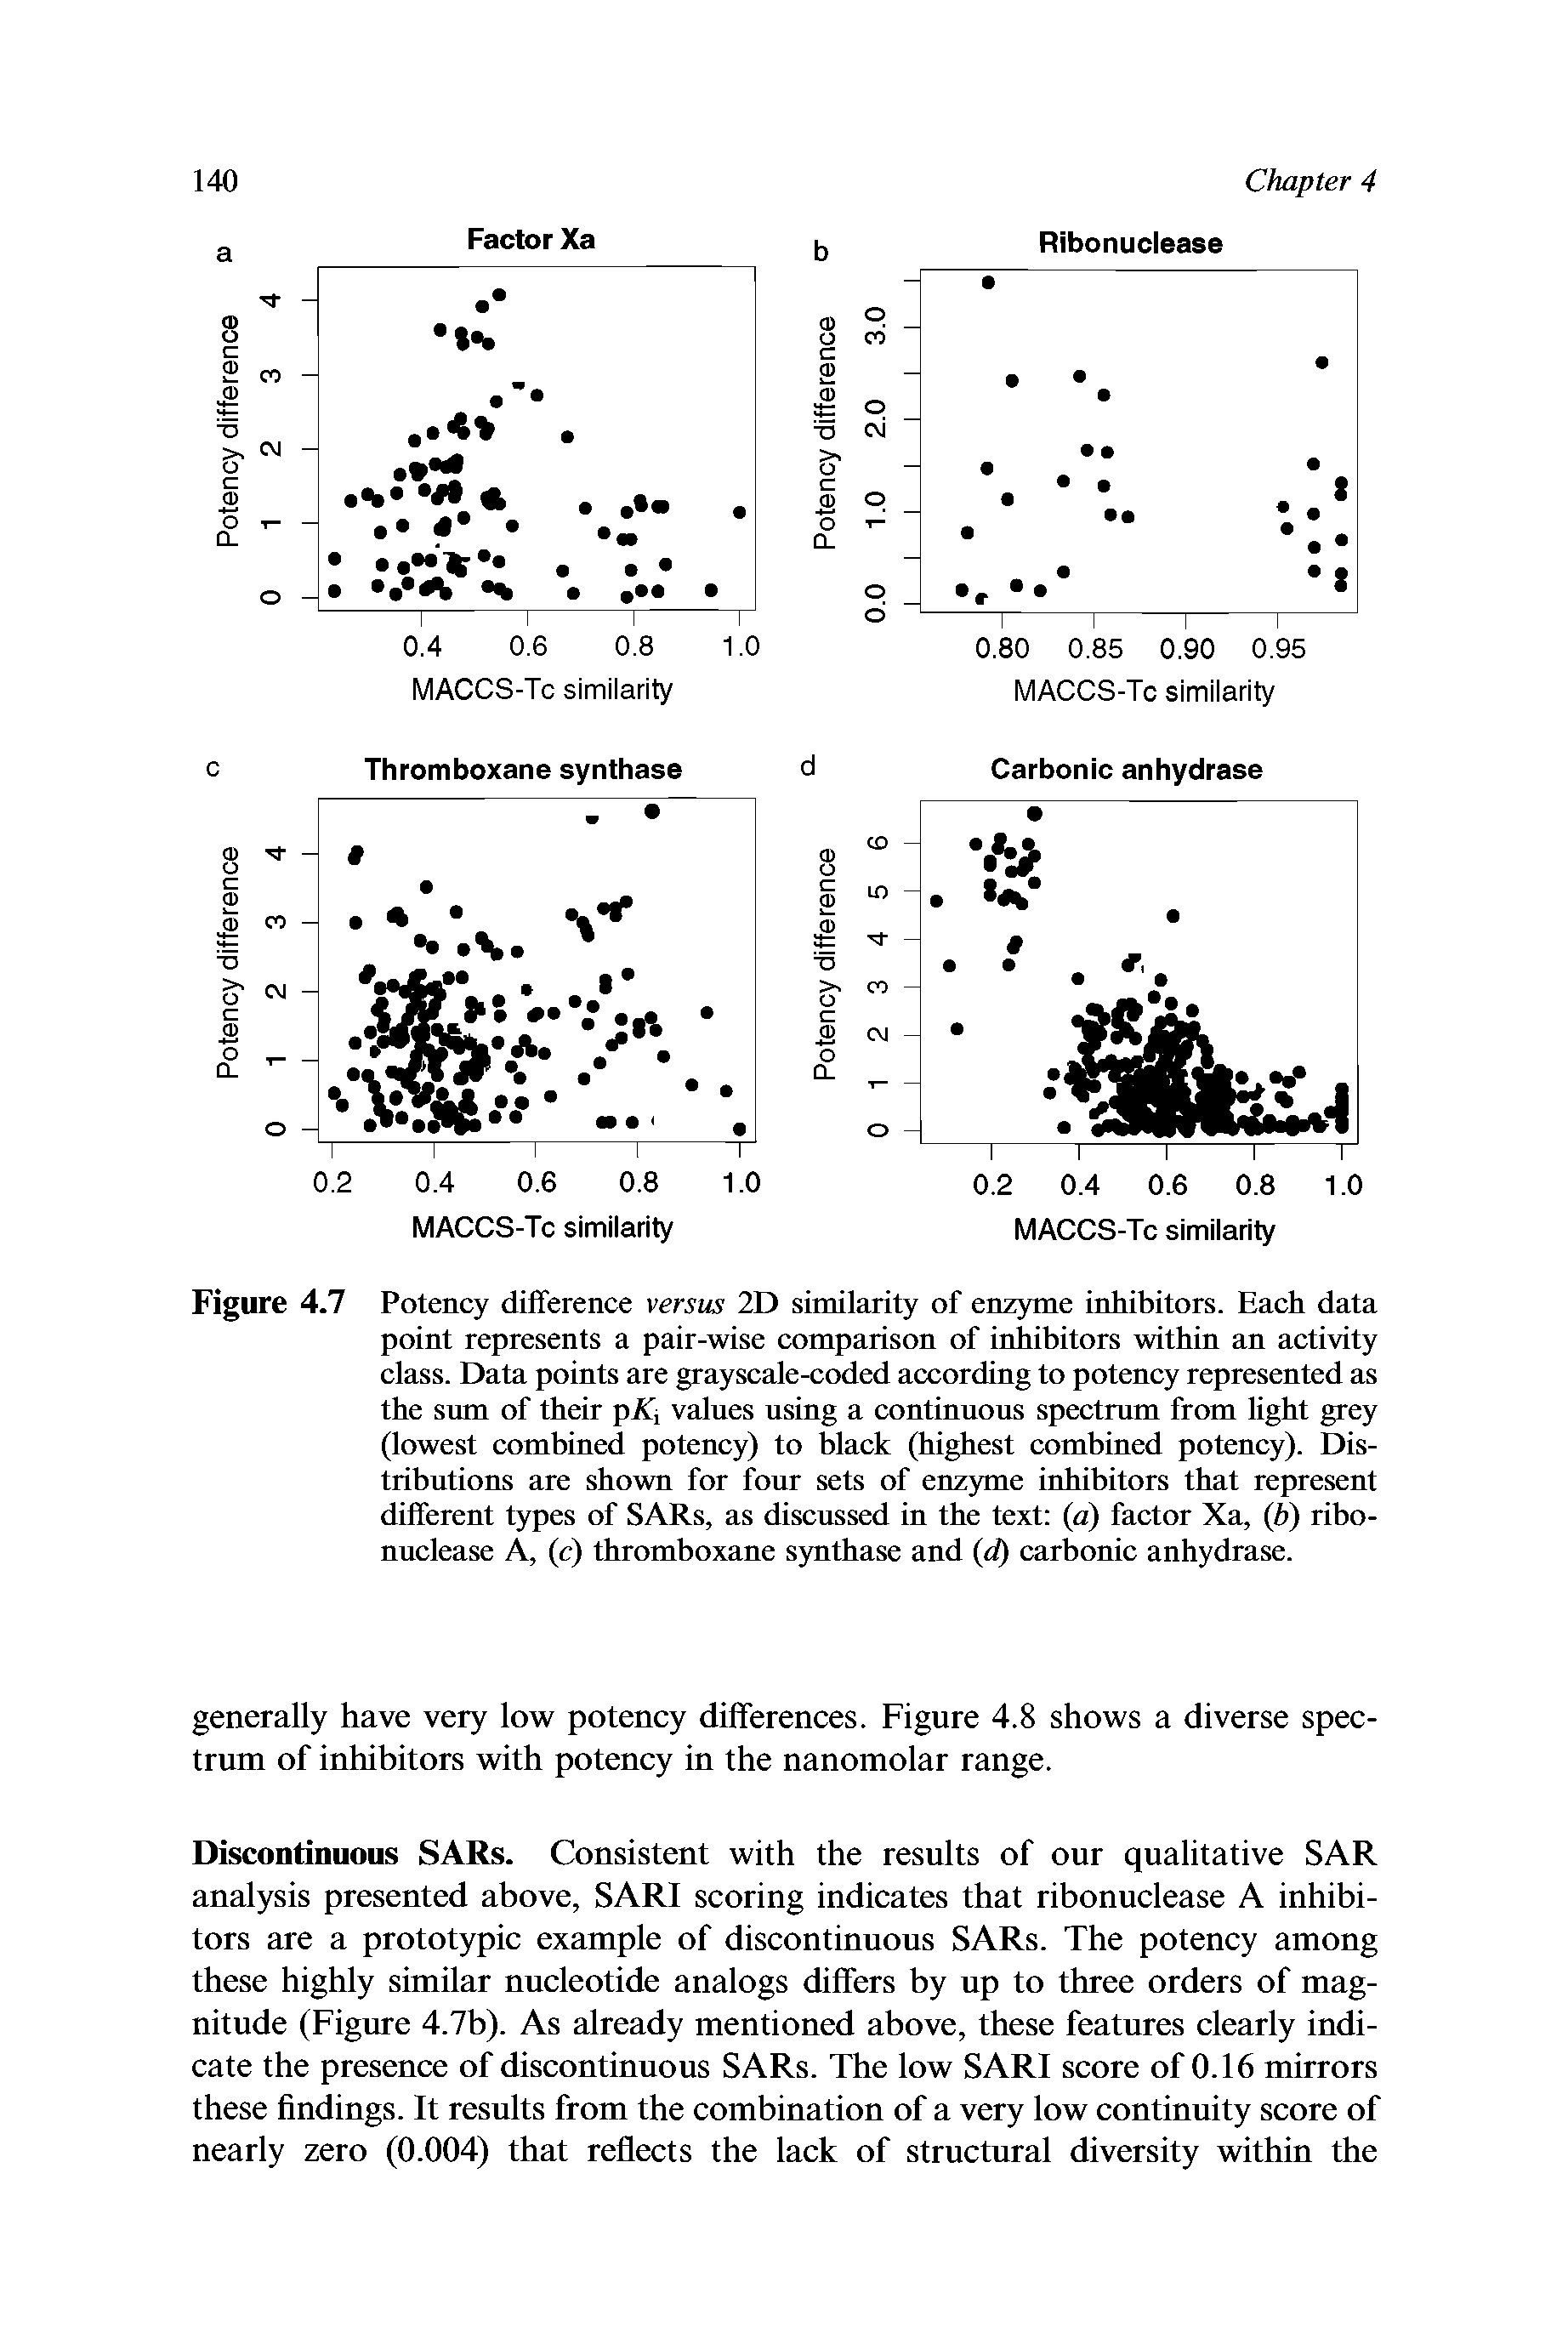 Figure 4.7 Potency difference versus 2D similarity of enz5rme inhibitors. Each data point represents a pair-wise comparison of inhibitors within an activity class. Data points are grayscale-coded according to potency represented as the sum of their pA i values using a continuous spectrum from light grey (lowest combined potency) to black (highest combined potency). Distributions are shown for four sets of enz5me inhibitors that represent different types of SARs, as discussed in the text (a) factor Xa, (h) ribonuclease A, (c) thromboxane S5mthase and d) carbonic anhydrase.